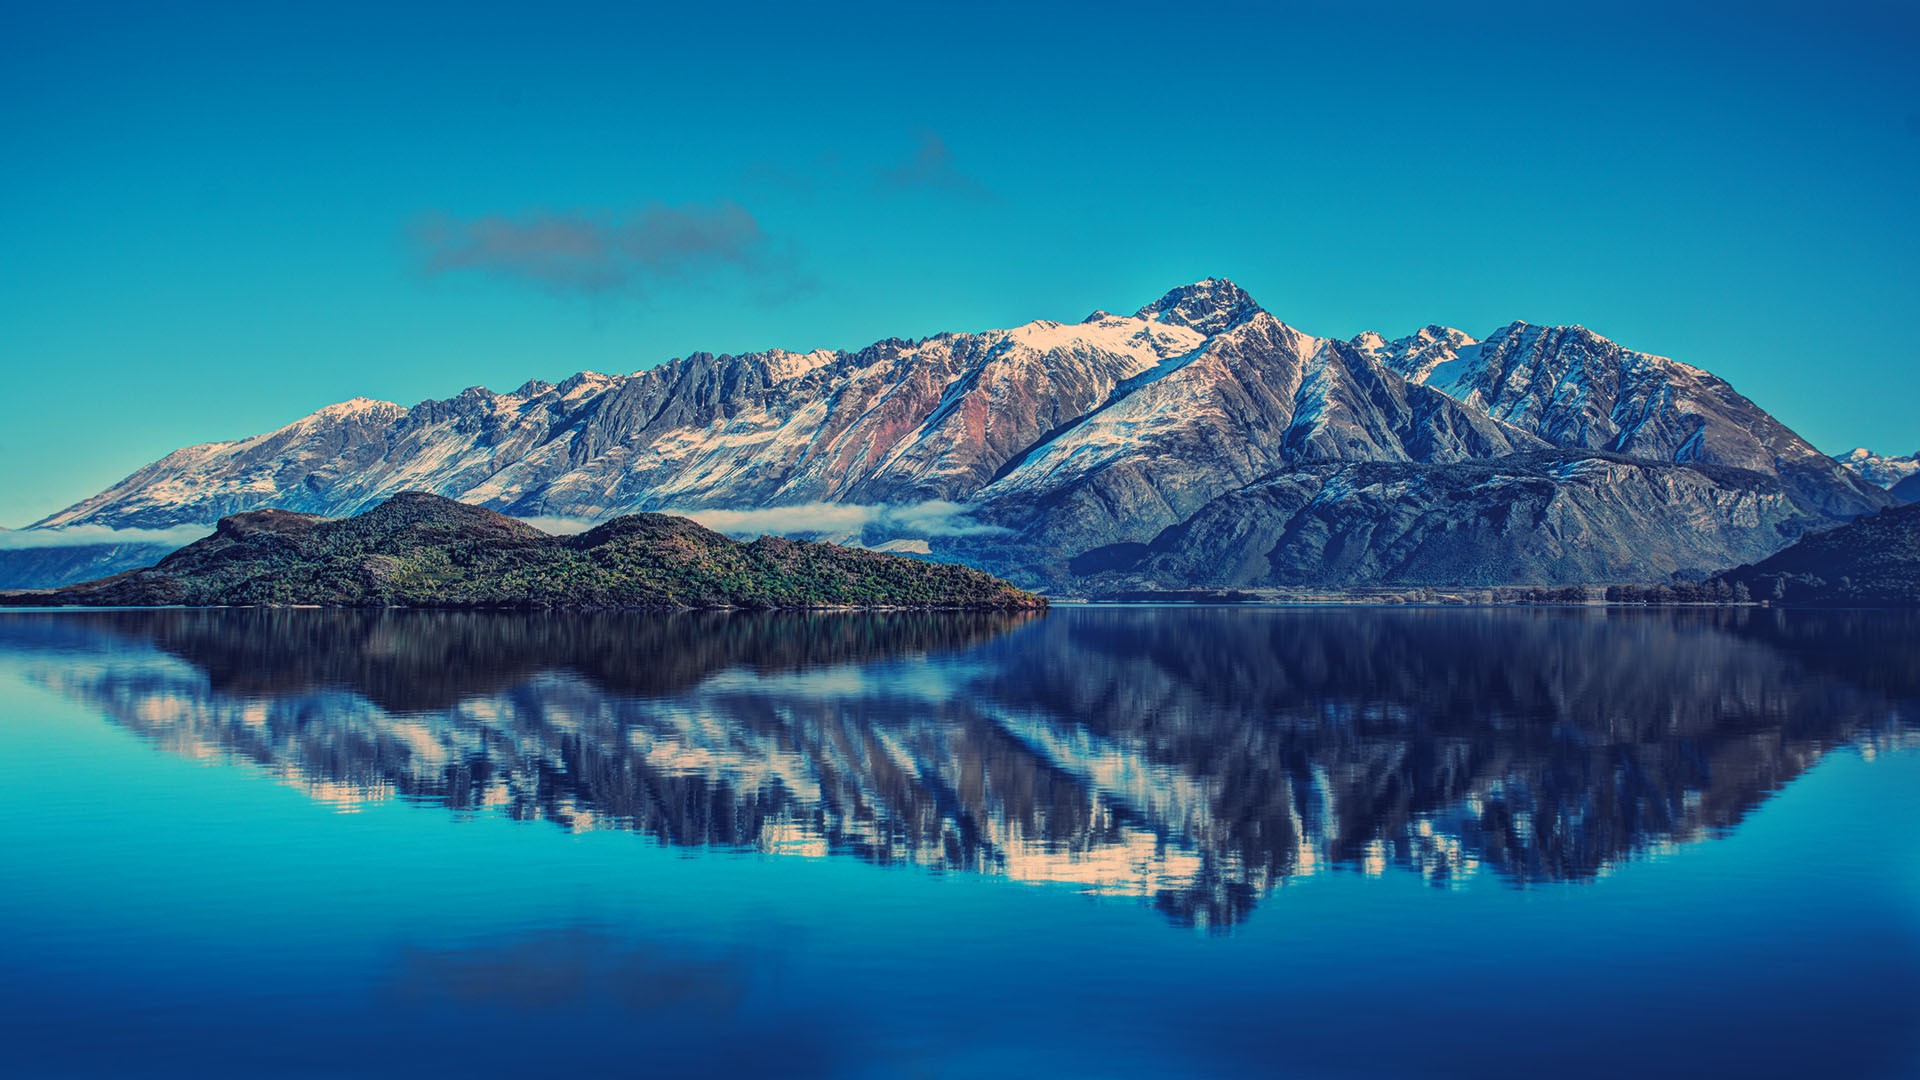 General 1920x1080 landscape mountains lake water reflection nature calm waters clear sky blue Lake Pukaki New Zealand crater lake snow outdoors